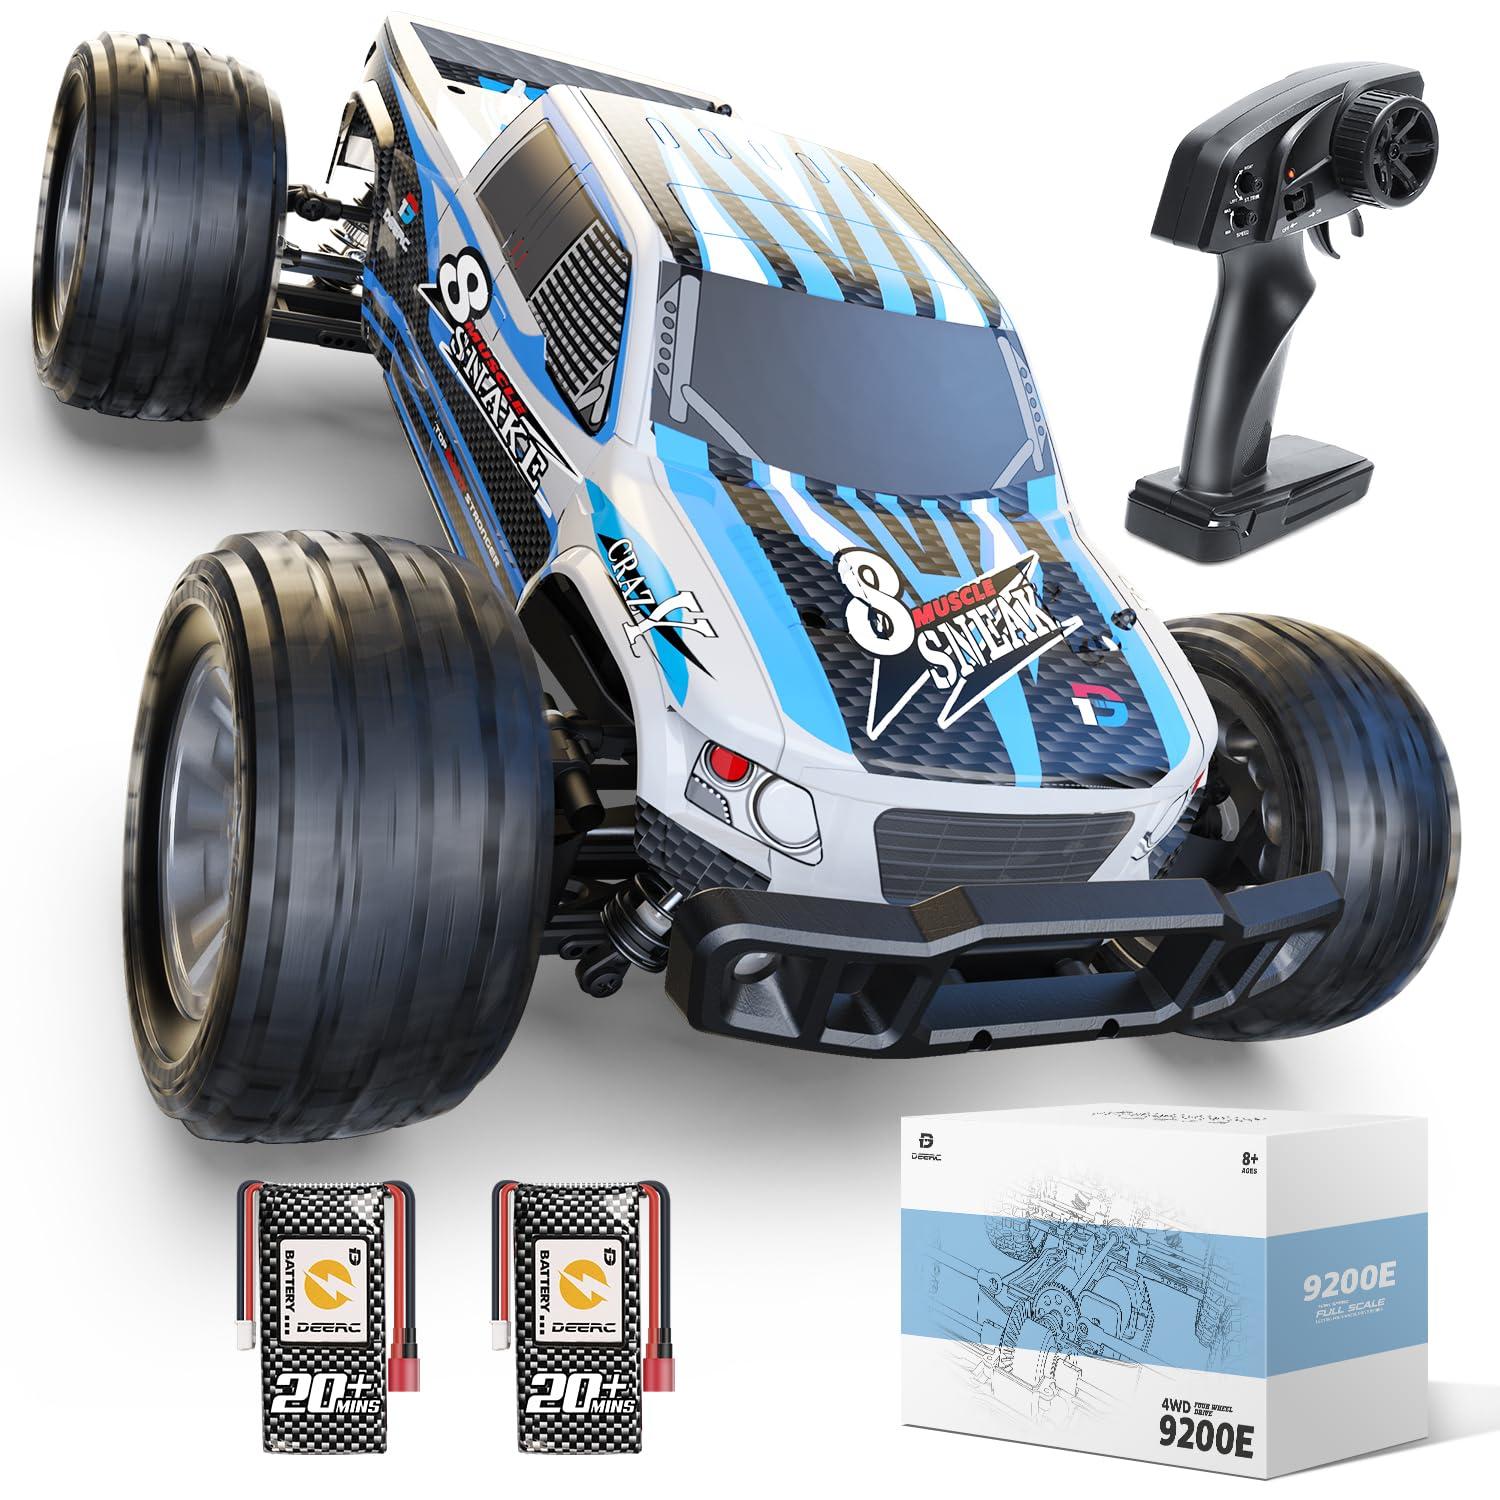 Best Place To Buy Rc Cars: Big Box Store Options